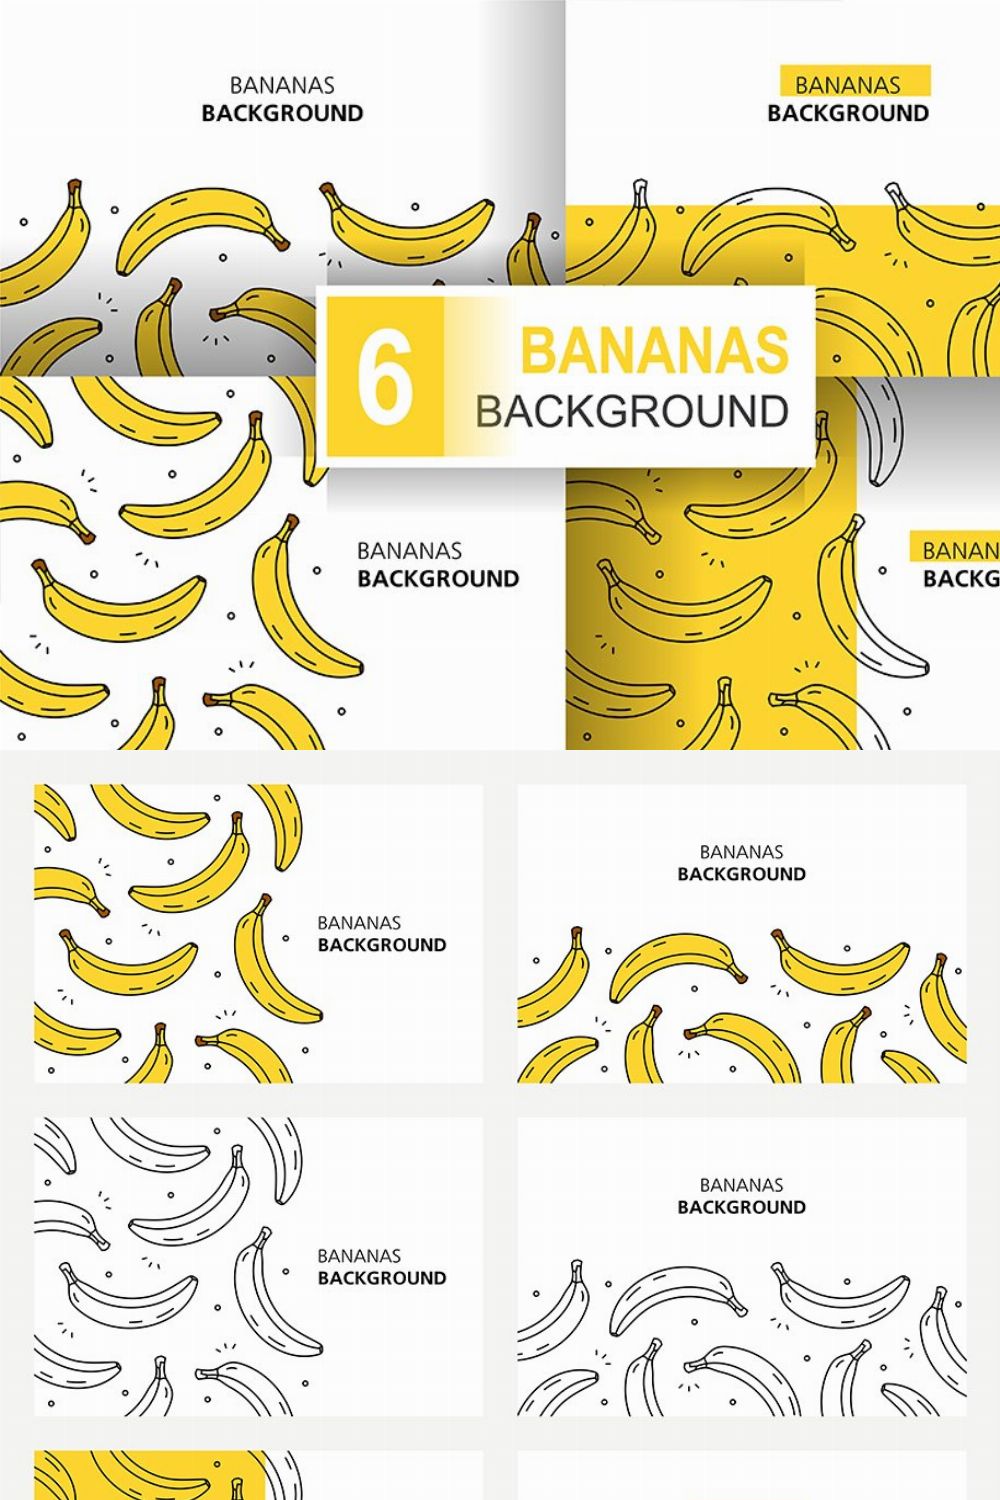 Bananas background pinterest preview image.